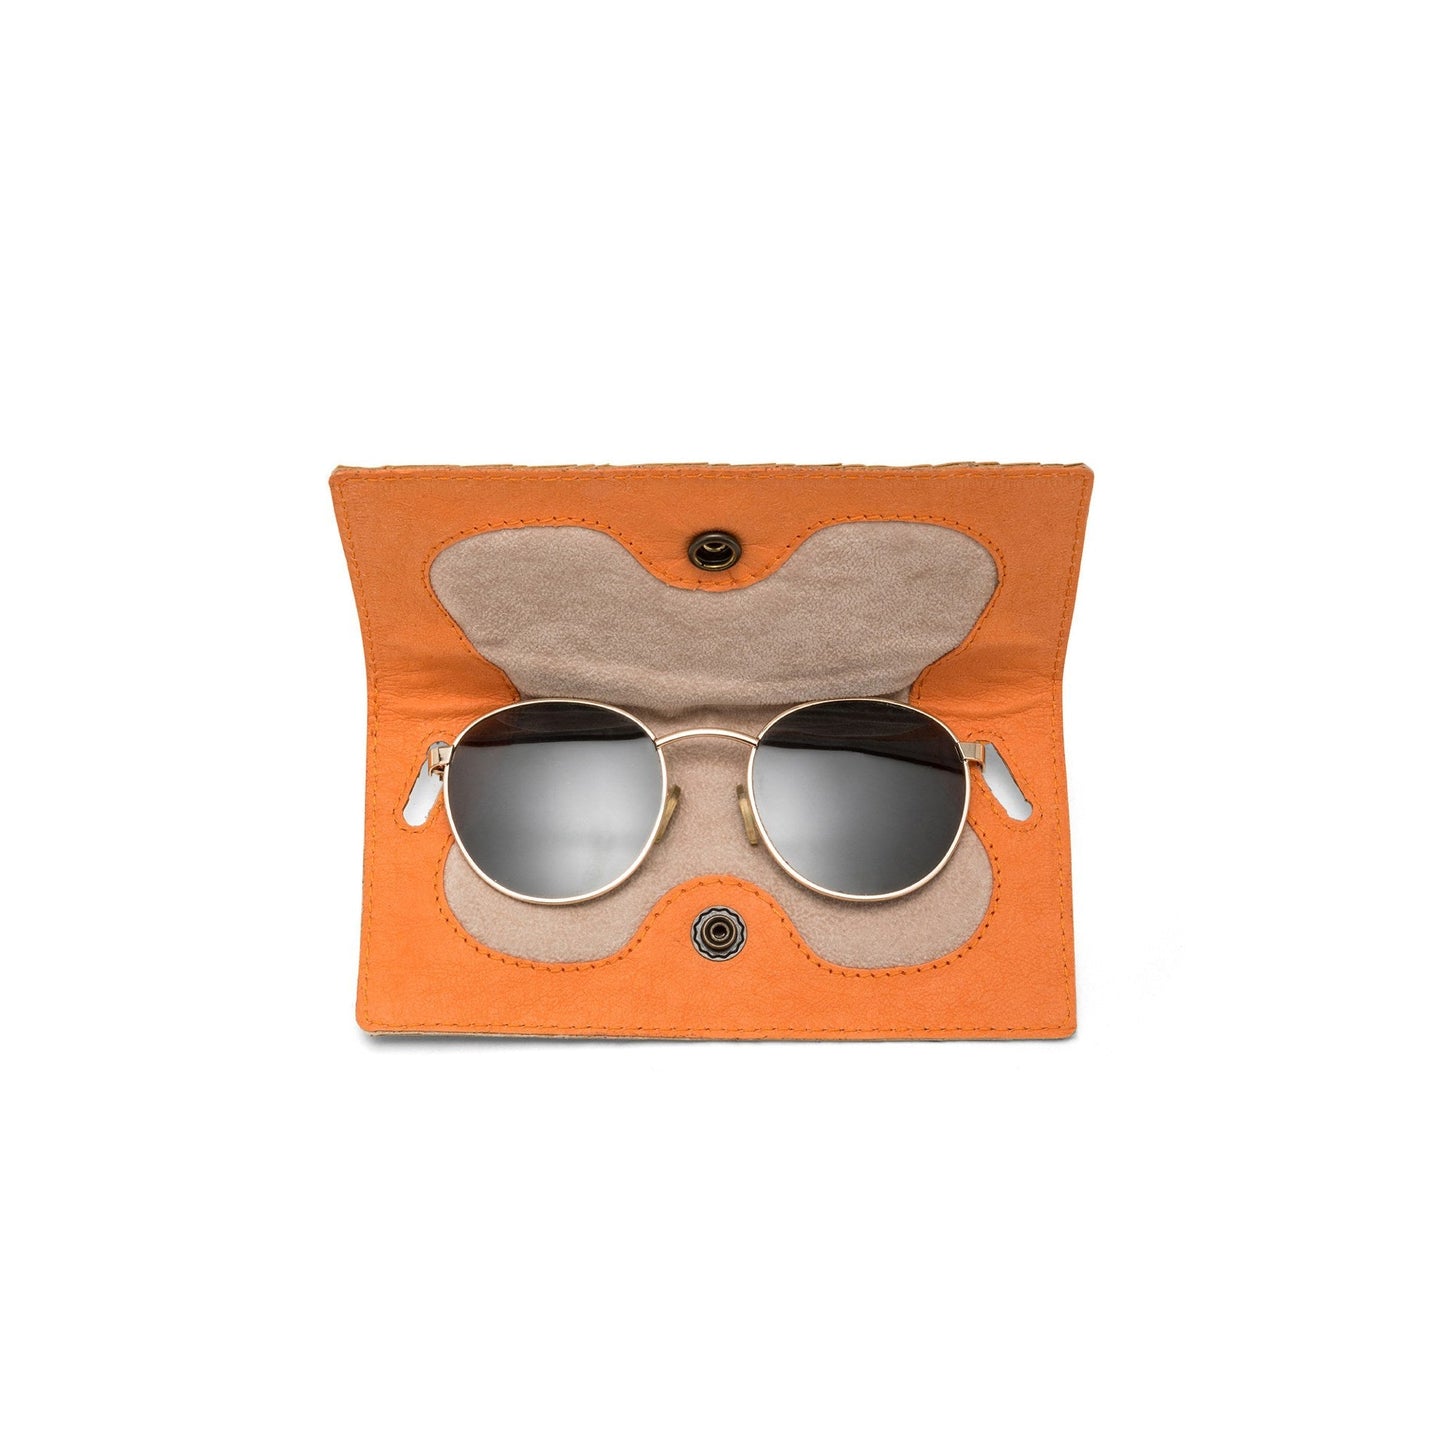 A washable paper glasses case is shown open, with an orange interior and a beige lining in the shape of a pair of glasses. It features a metal stud closure, and a pair of sunglasses sit inside it.